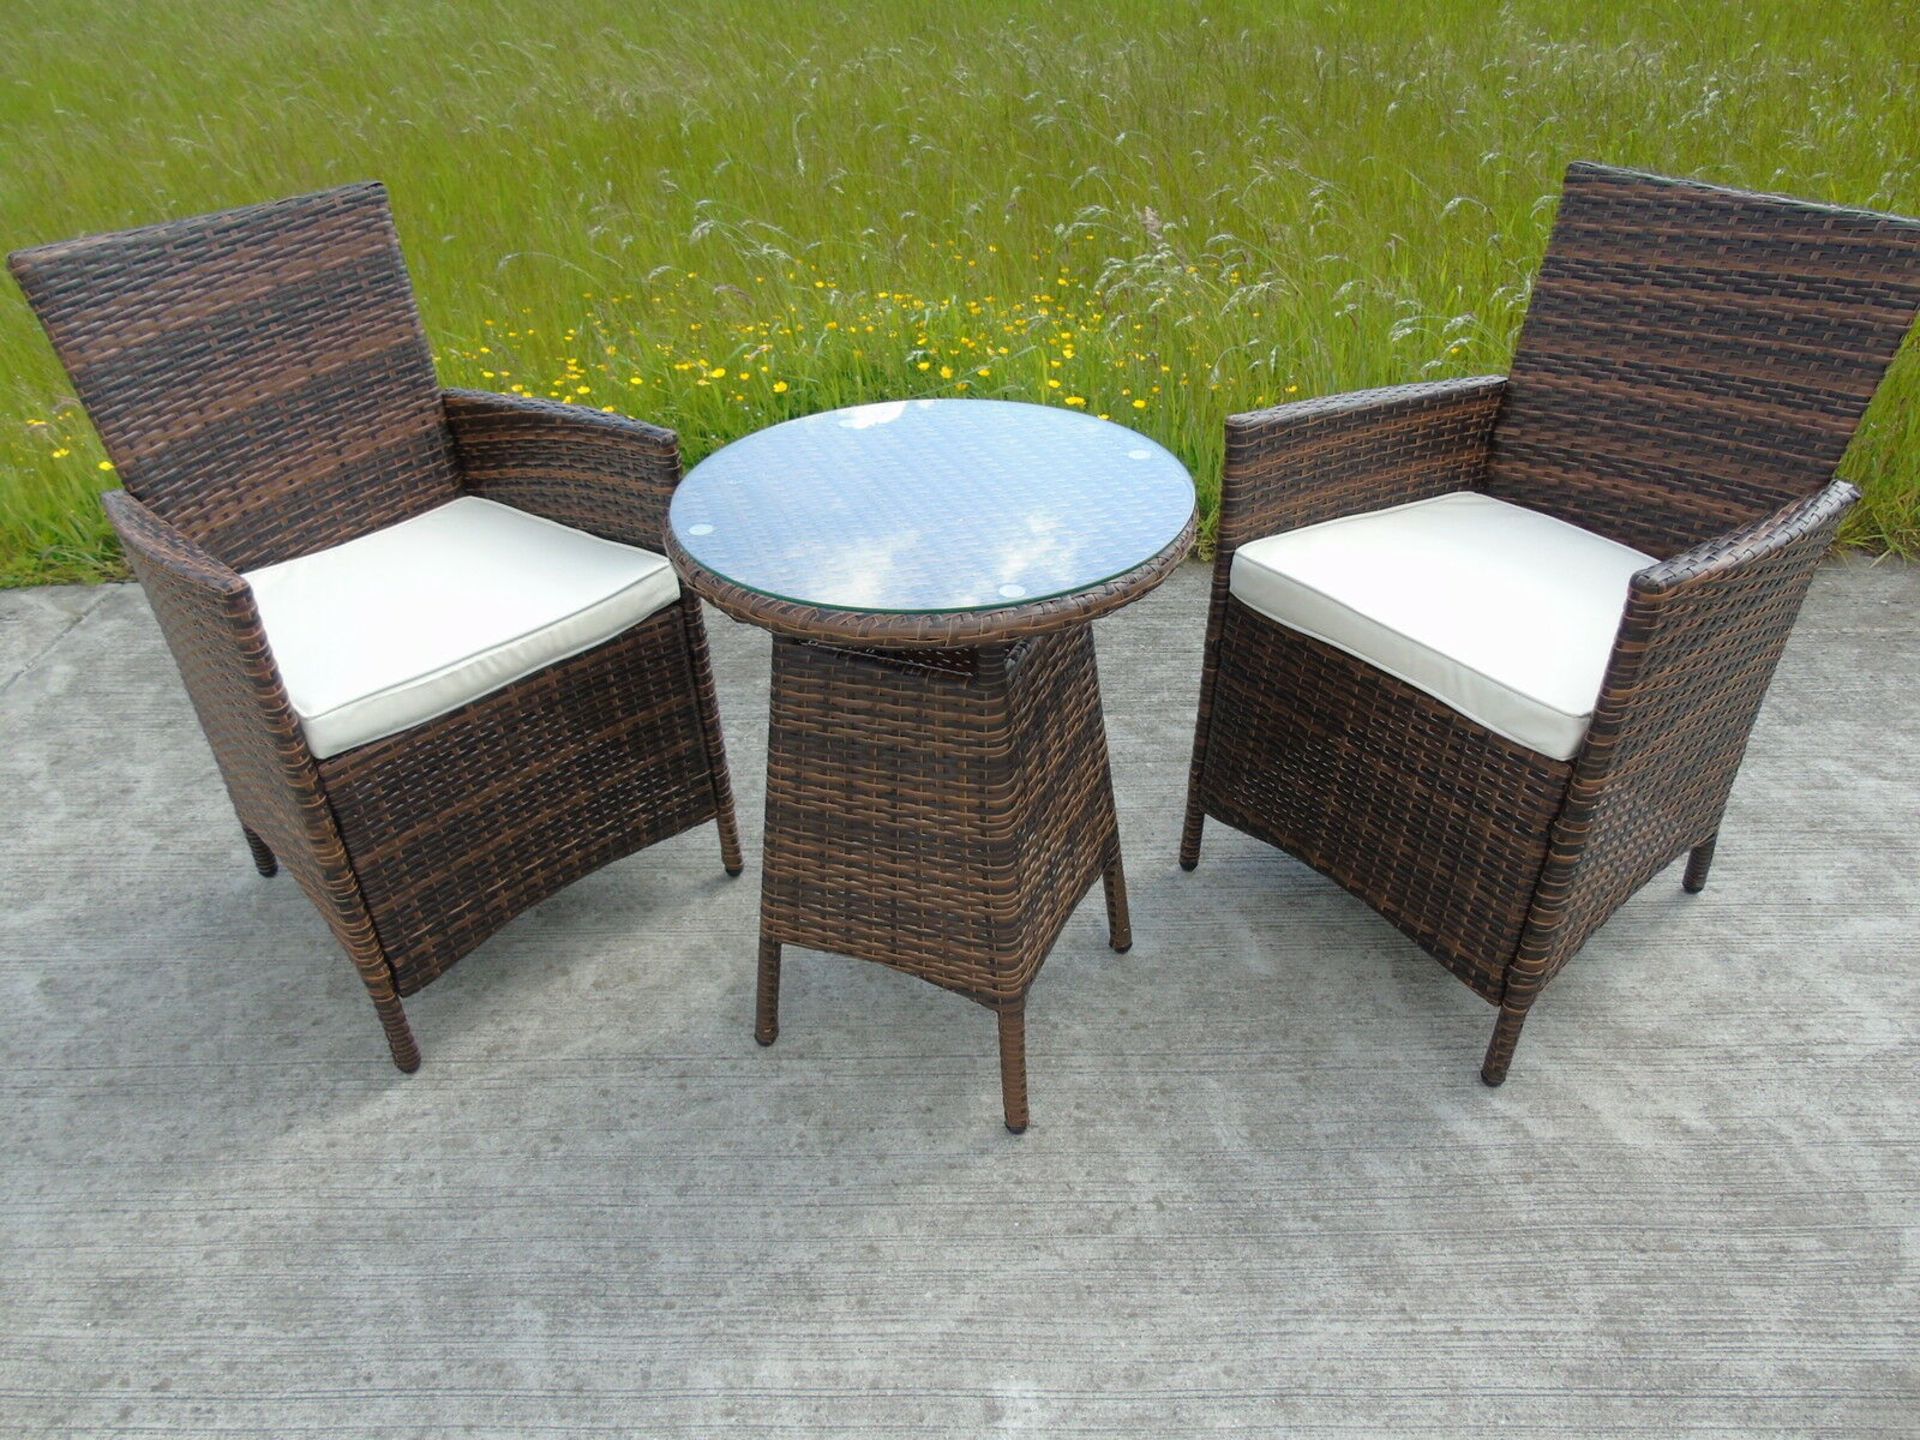 + VAT Brand New Chelsea Garden Company Two Person Table & Chair Set - Aluminium Frame - Double 1/2